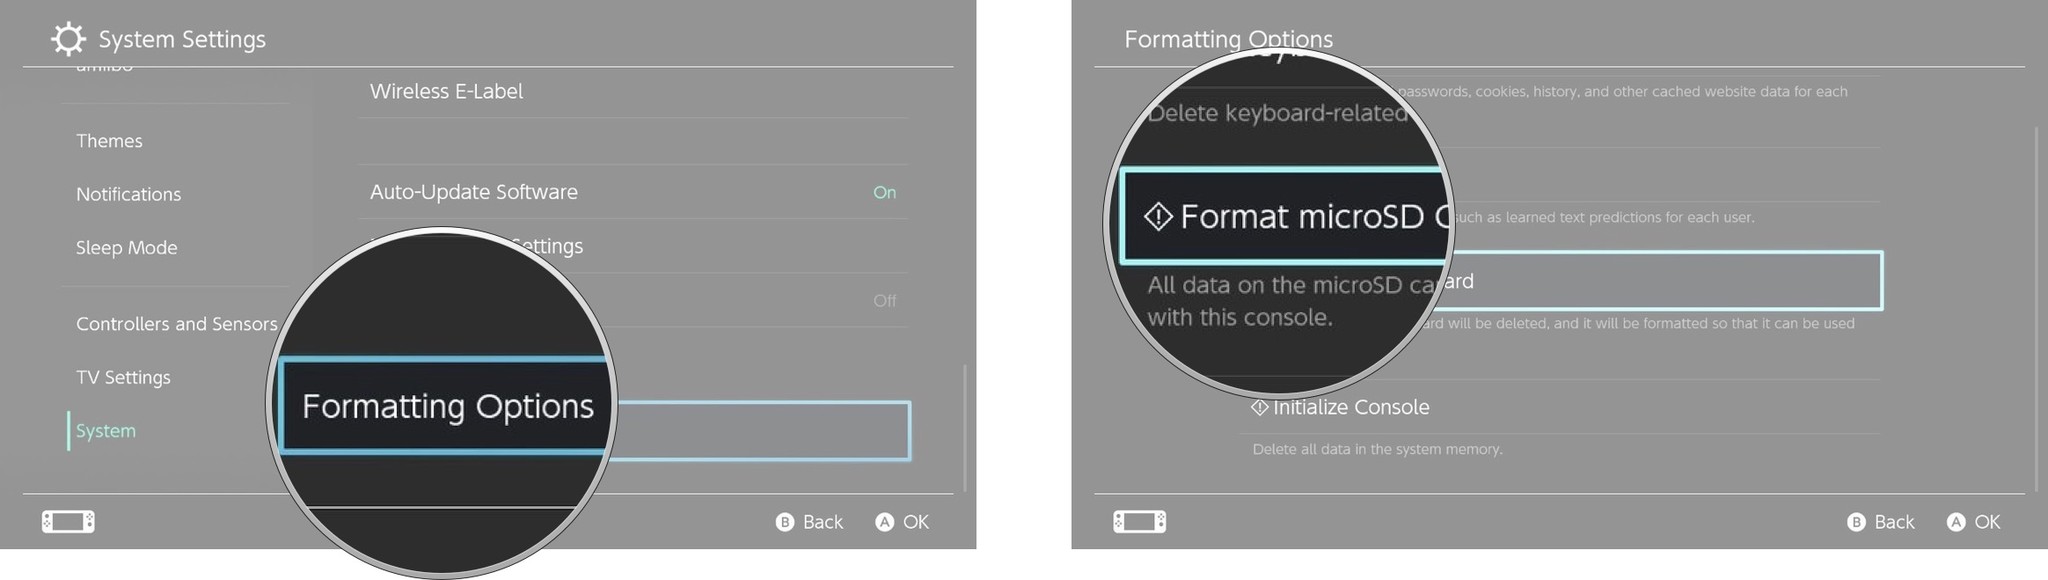 How to format a microSD card on Nintendo Switch: select formatting options, select format microSD card